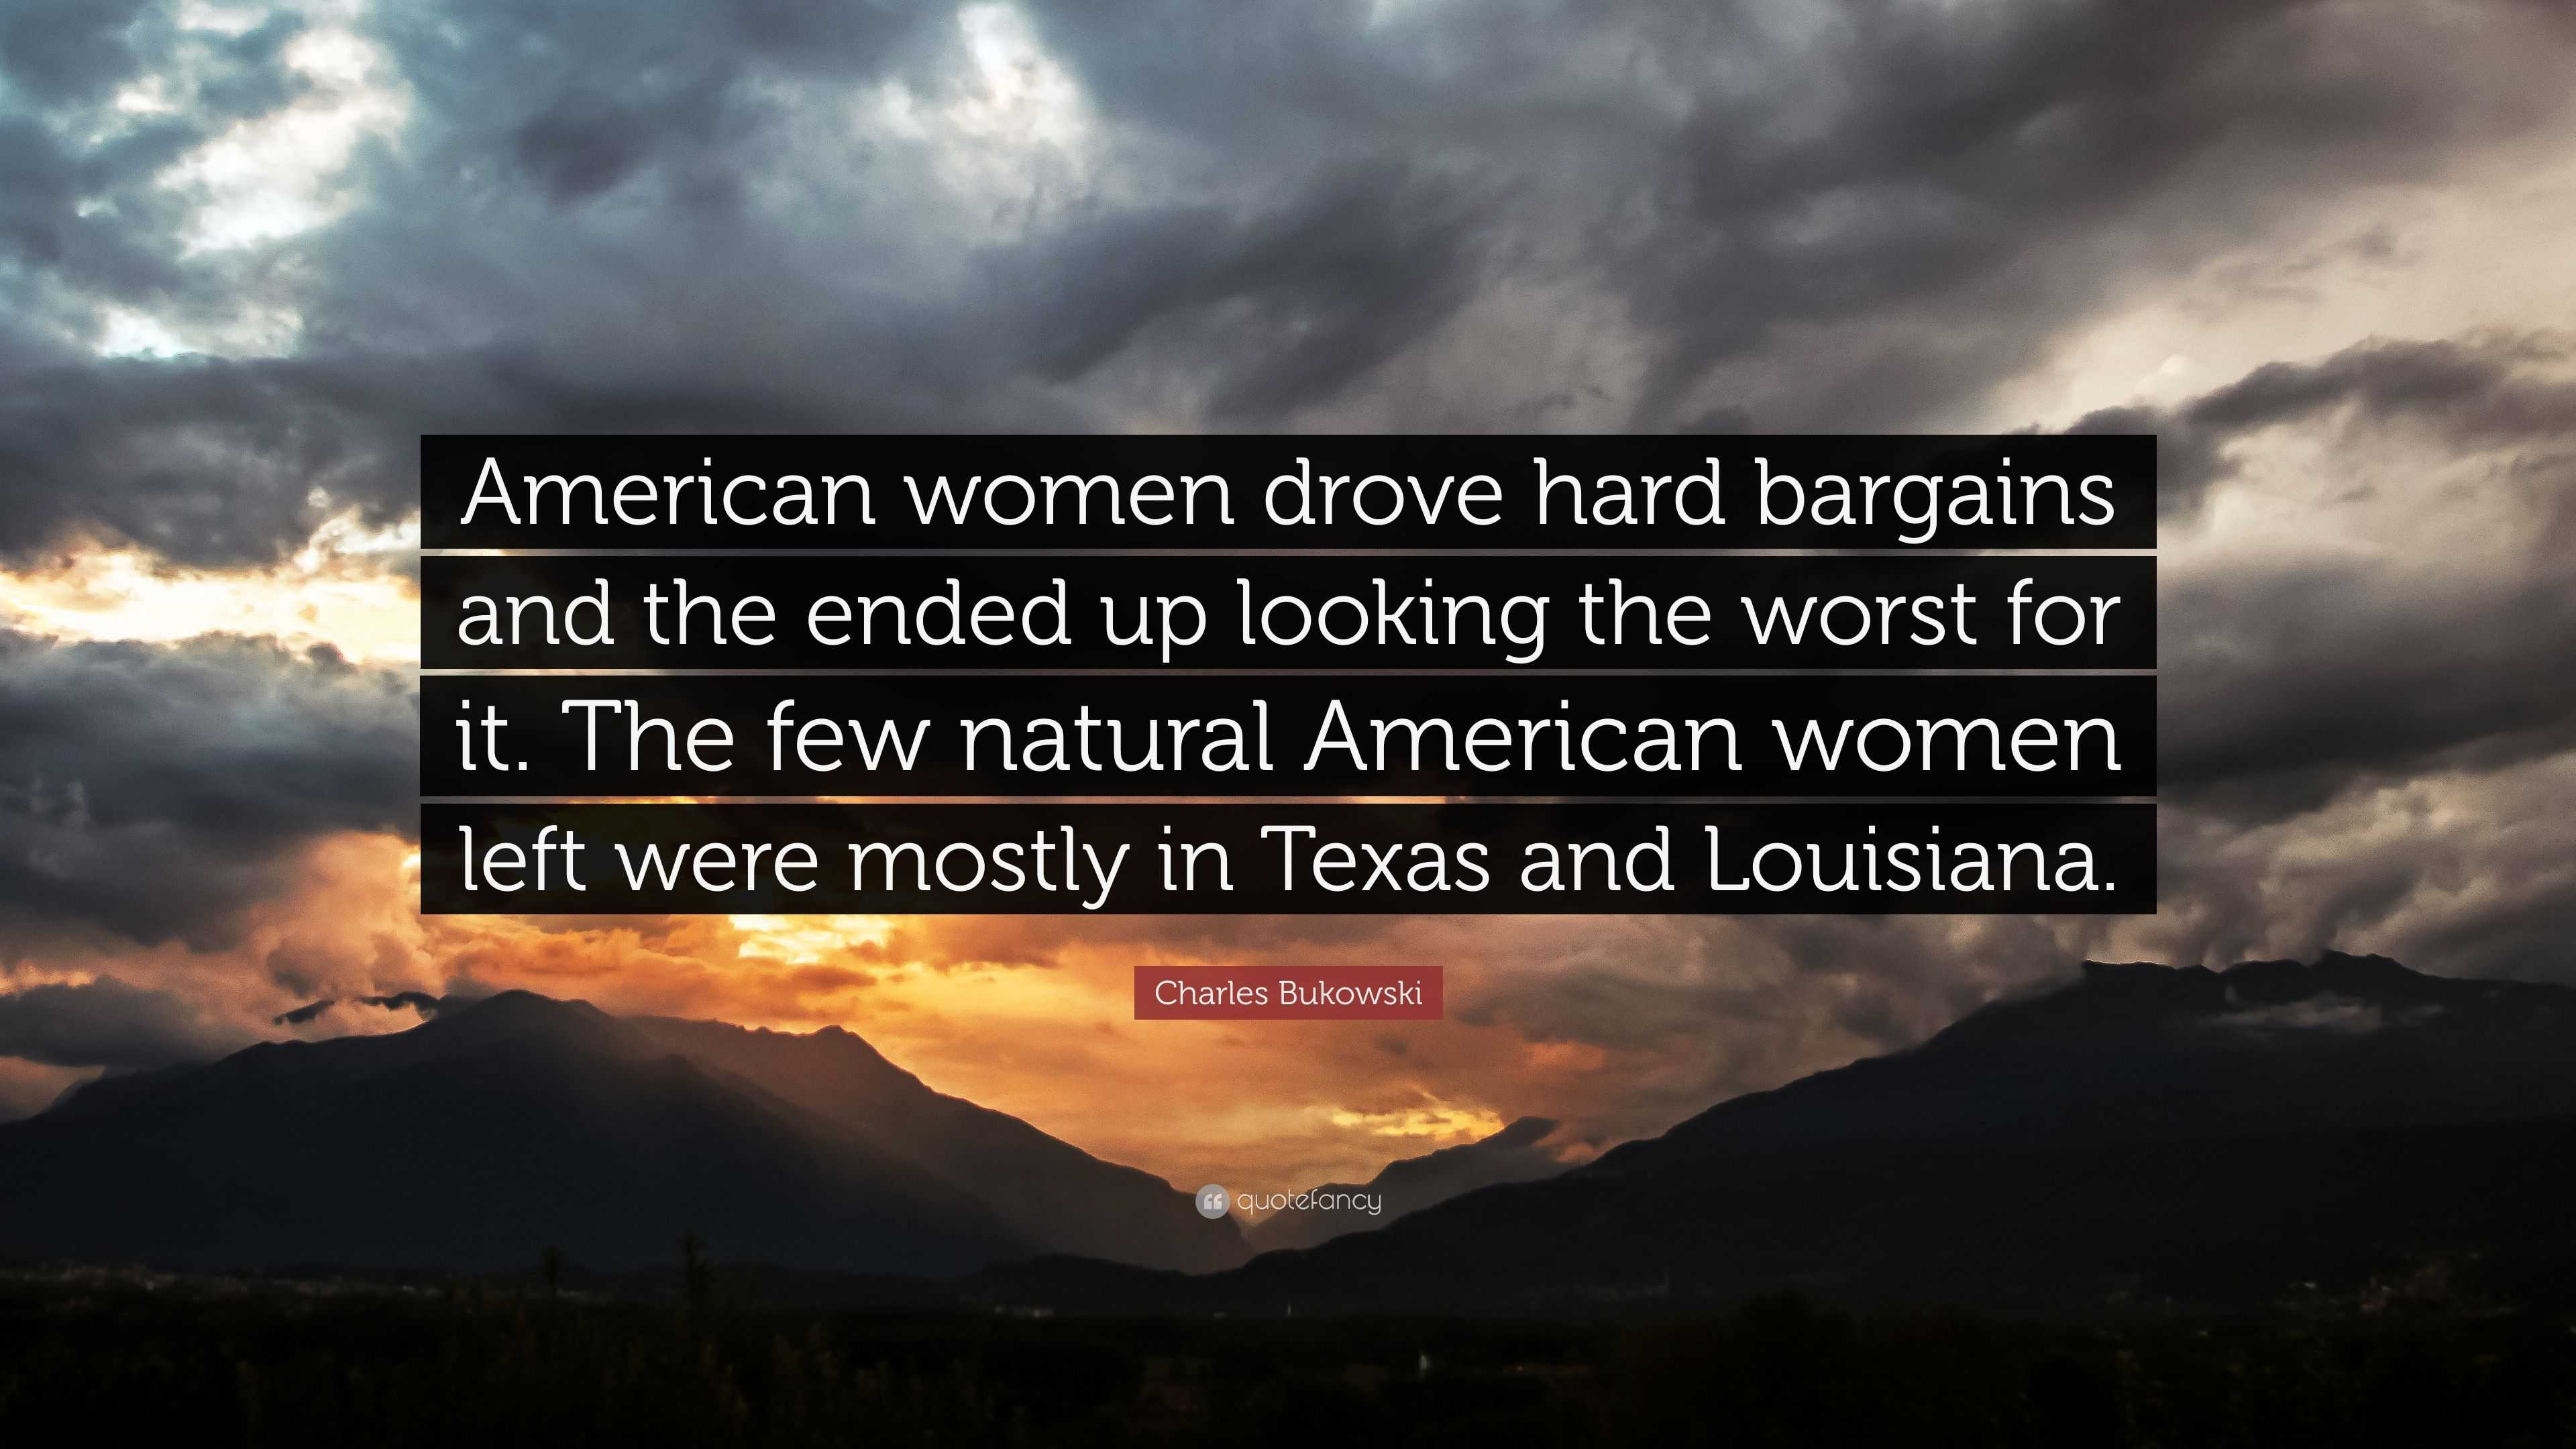 Charles Bukowski Quote: “American women drove hard bargains and the ended  up looking the worst for it. The few natural American women left were m”